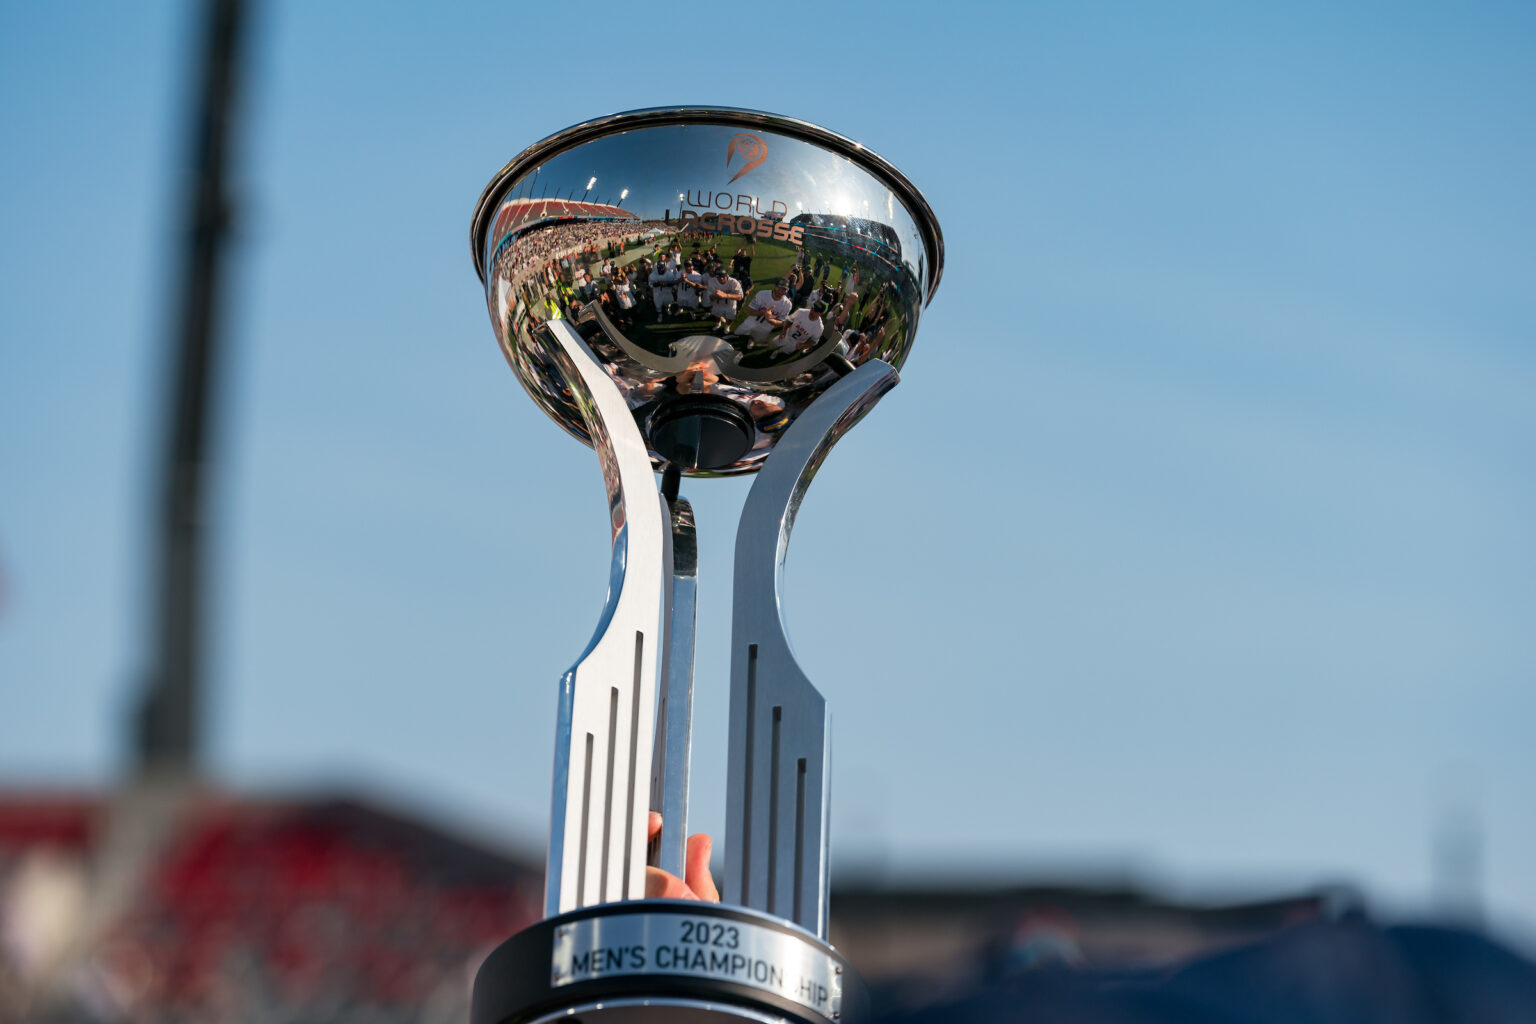 2023 World Lacrosse Men’s Championship concludes after 11 days World